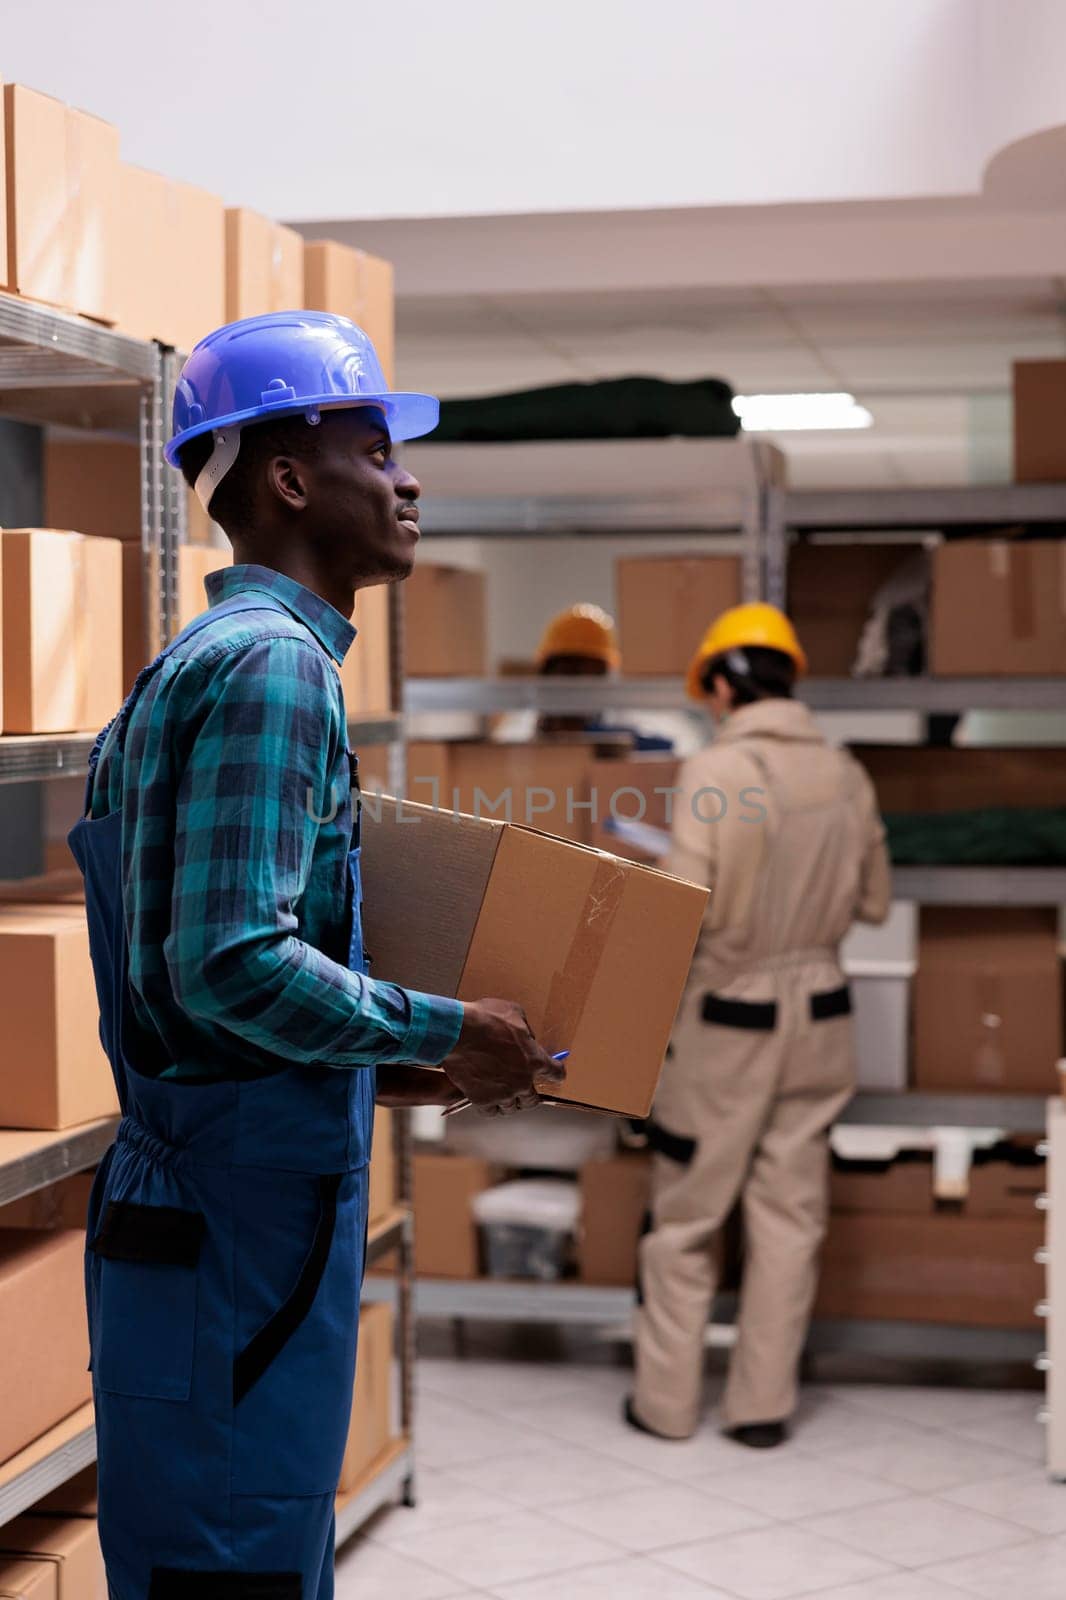 Warehouse manager wearing protective helmet carrying parcel by DCStudio